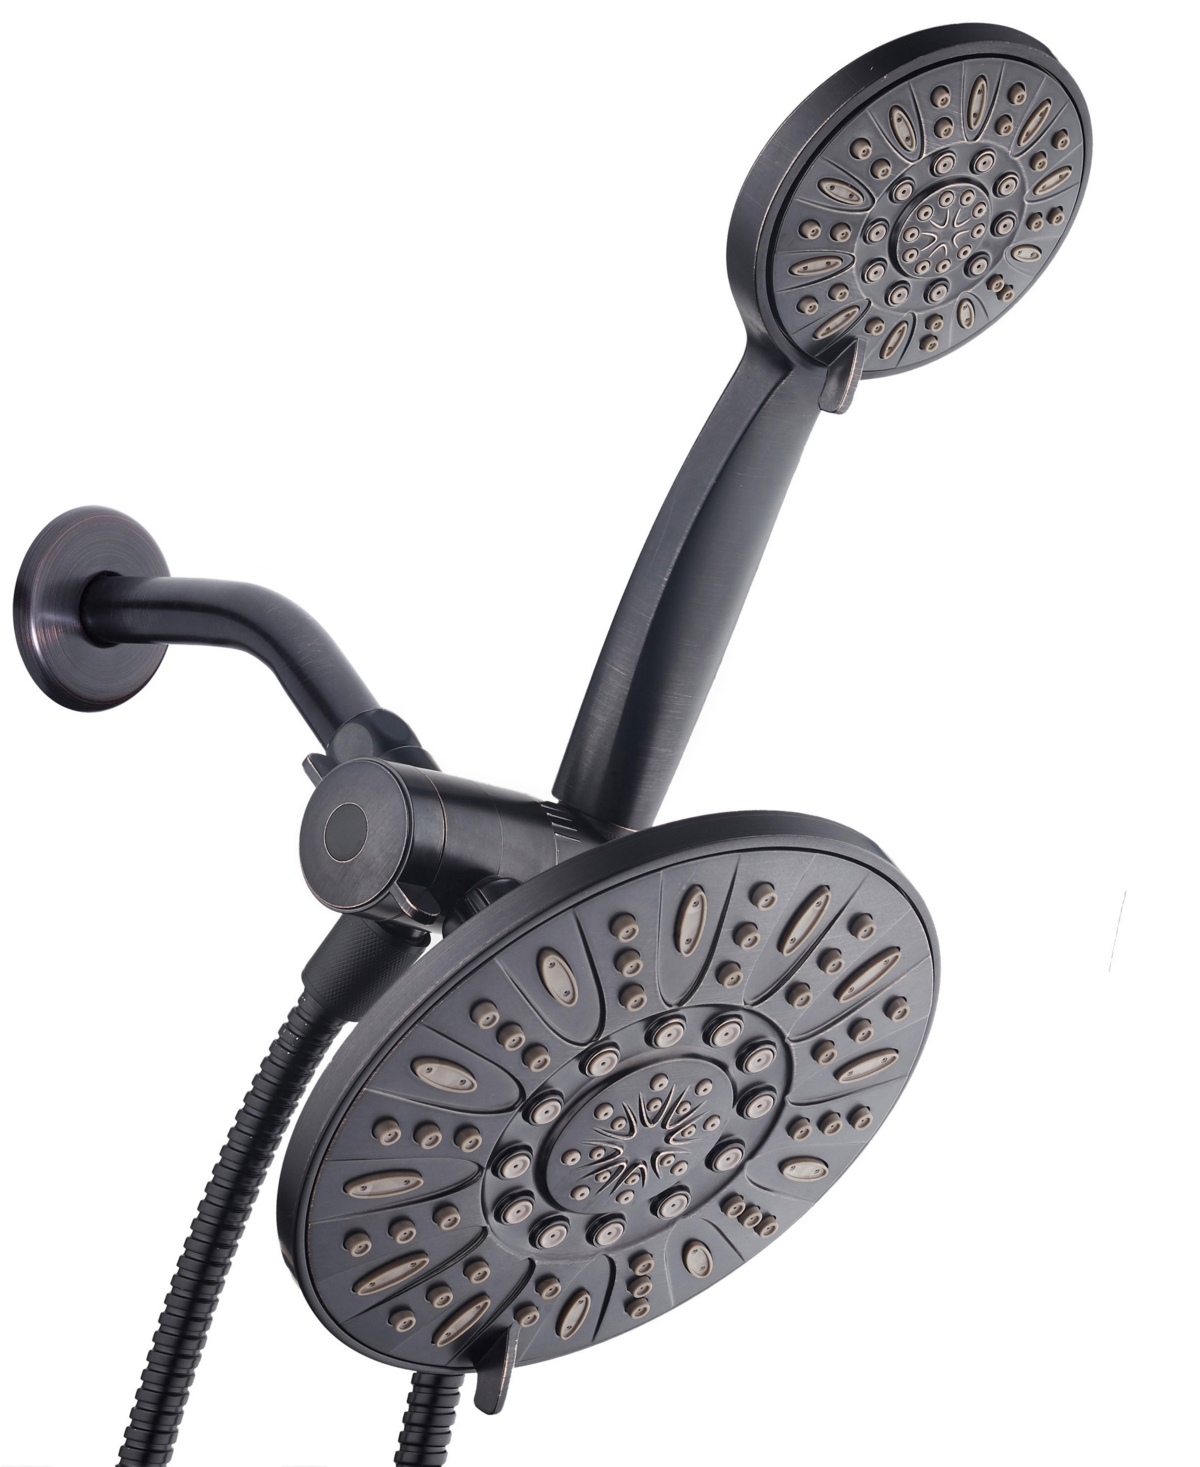 High-Pressure 48-Setting Dual Shower Head Combo with Extra-long 6 Foot Hose - Oil Rubbed Bronze